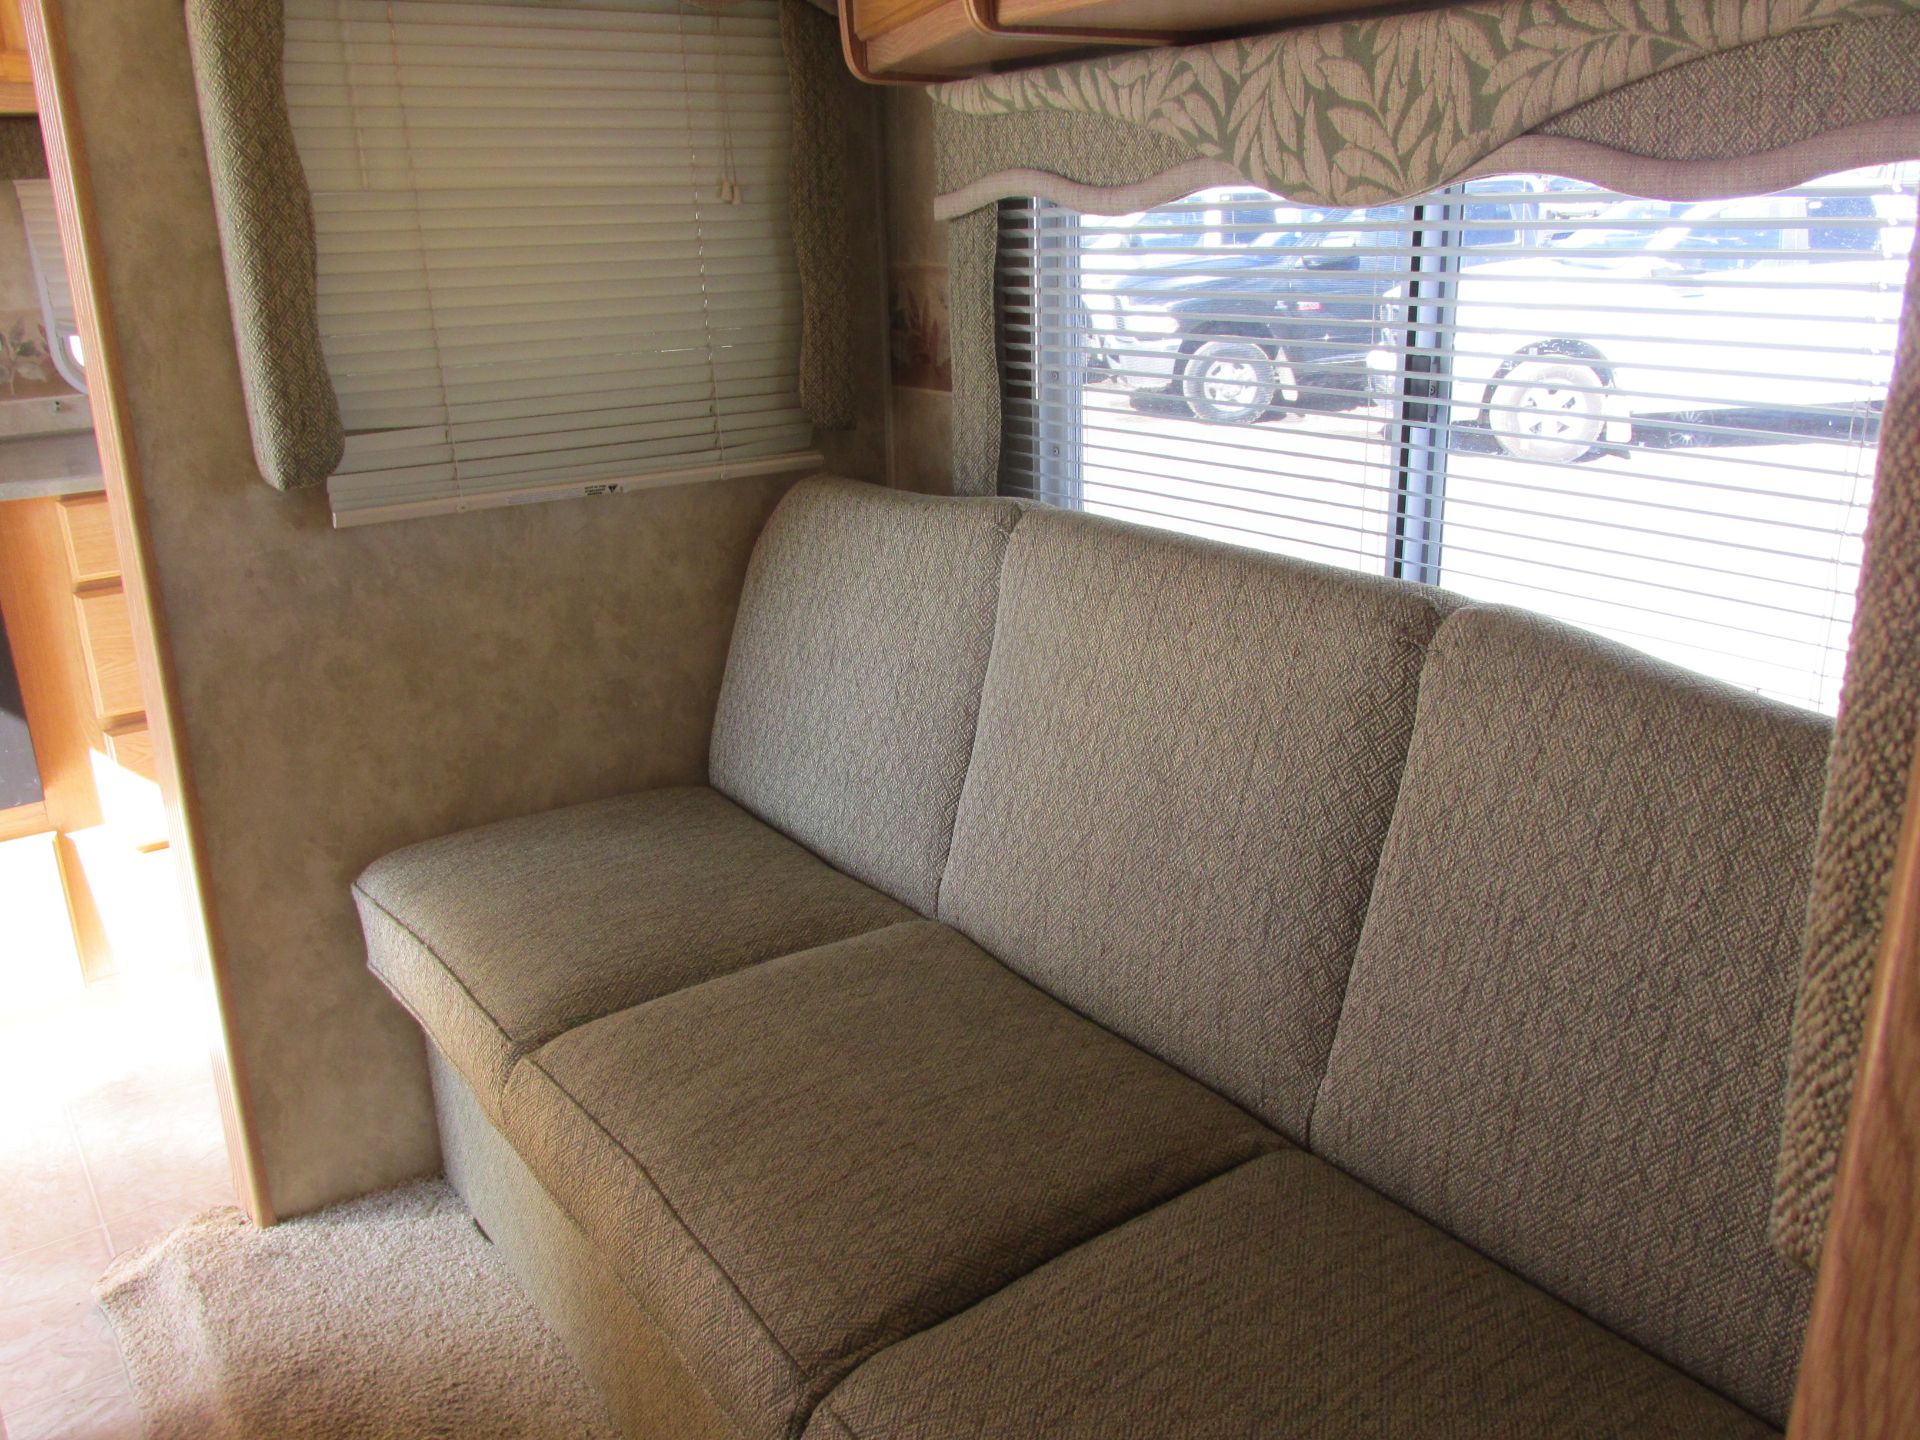 2007 FLEETWOOD TERRY RESORT 240RSK TRAVEL TRAILER SN:1EA1R242972498637 ALBERTA ACTIVE NOTES:FRONT: - Image 7 of 10